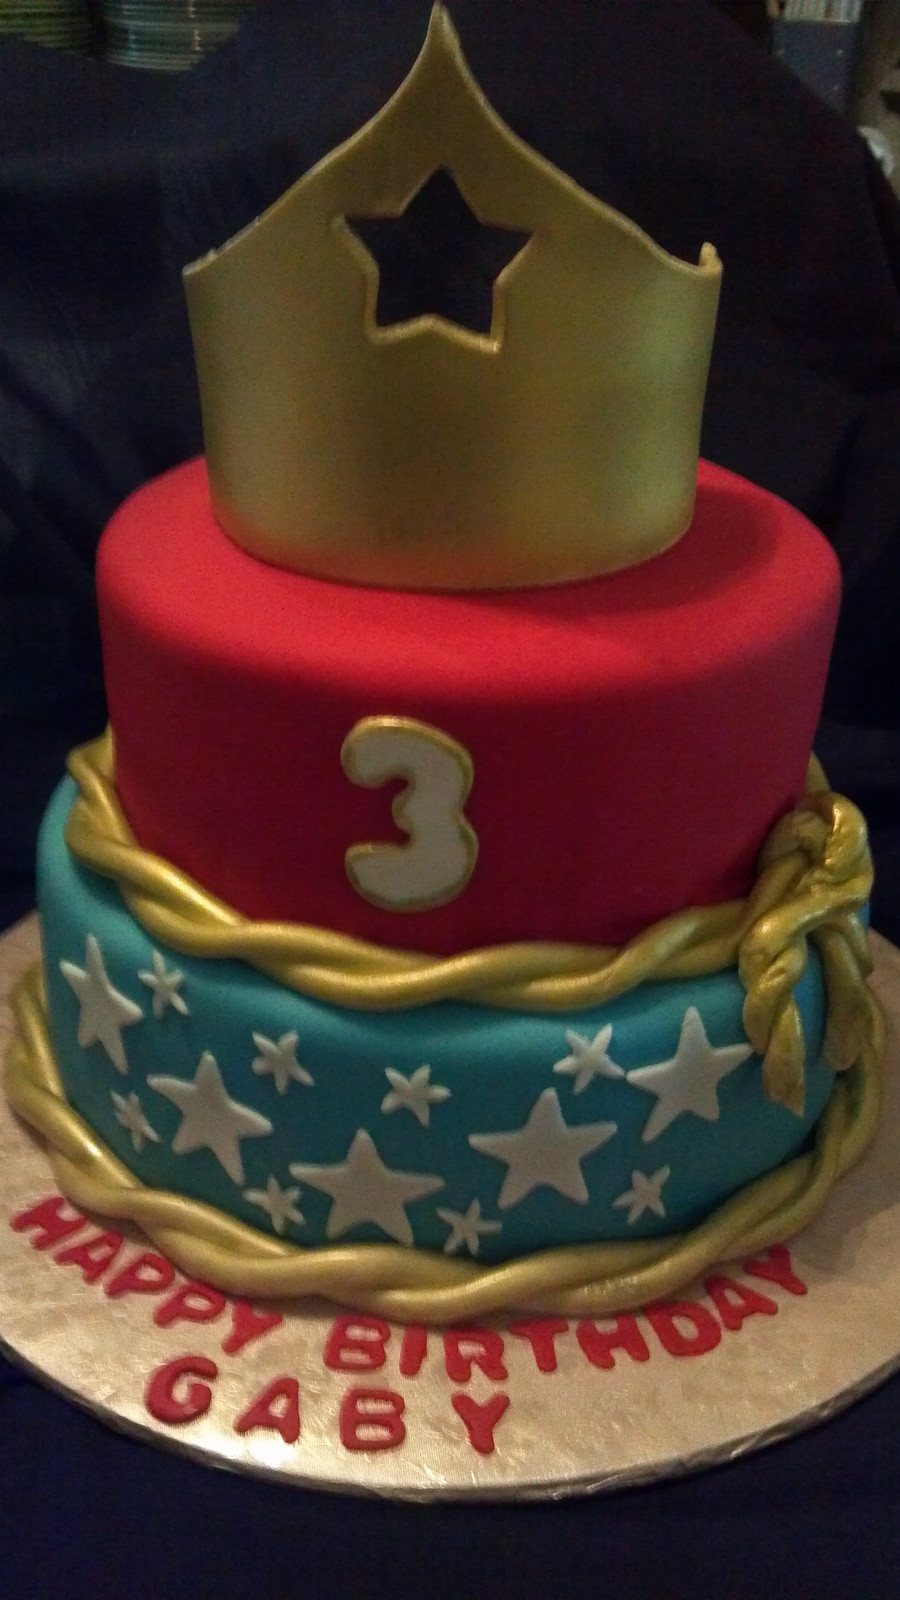 3 Year Old Birthday Cake
 Wonder Woman Birthday Cake For A 3 Year Old Cake Covered